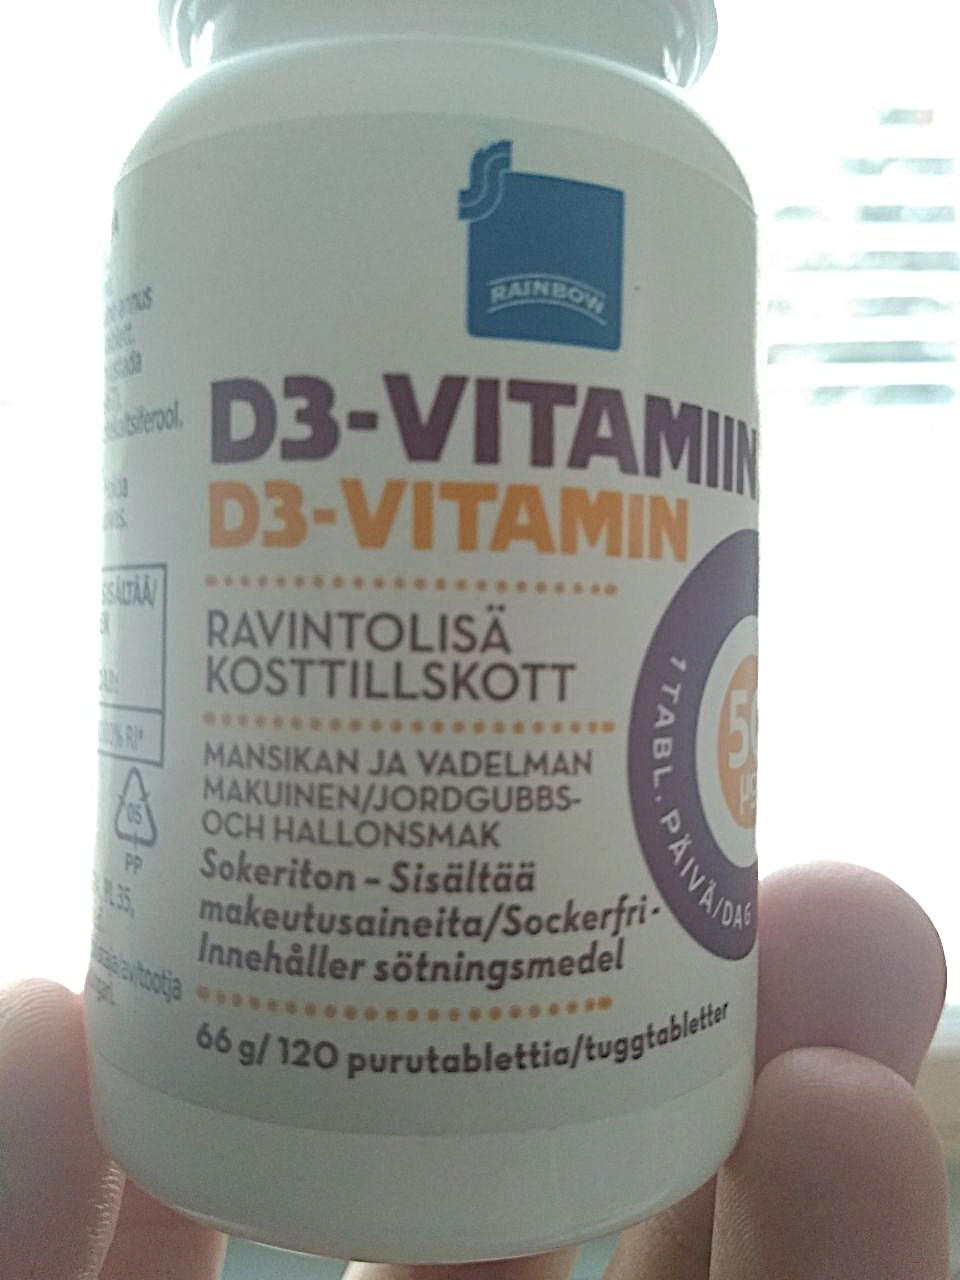 A picture of the front side of a bottle of vitamins. Finnish and Swedish text.